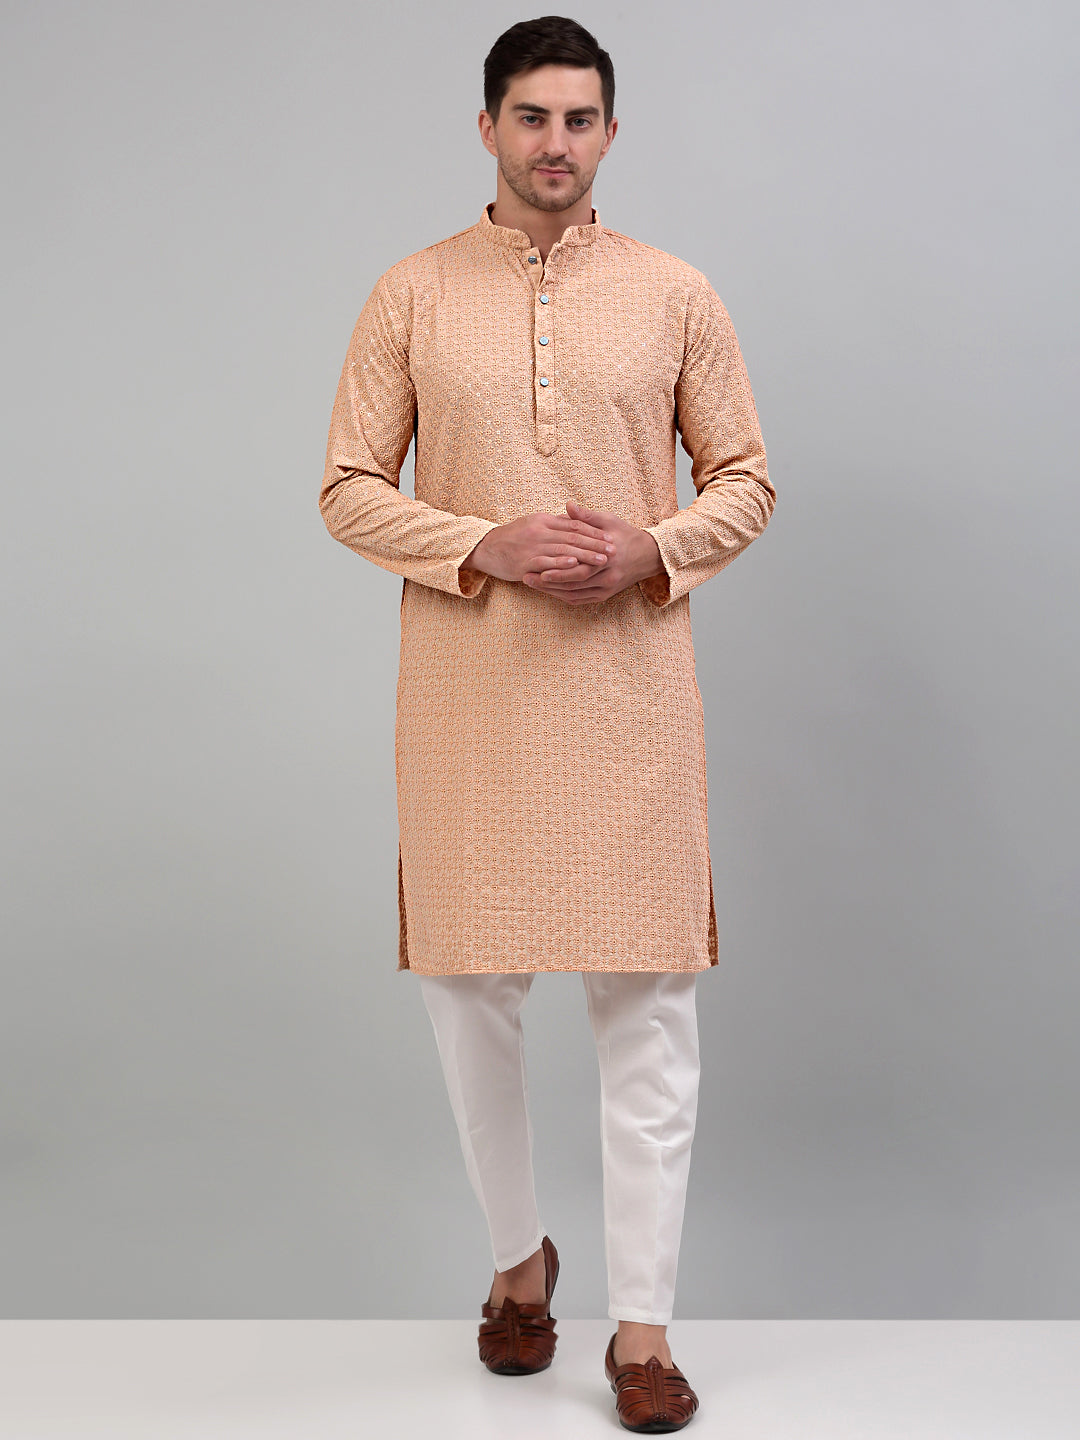 Men's Peach Chikankari Embroidered and Sequence Kurta Only